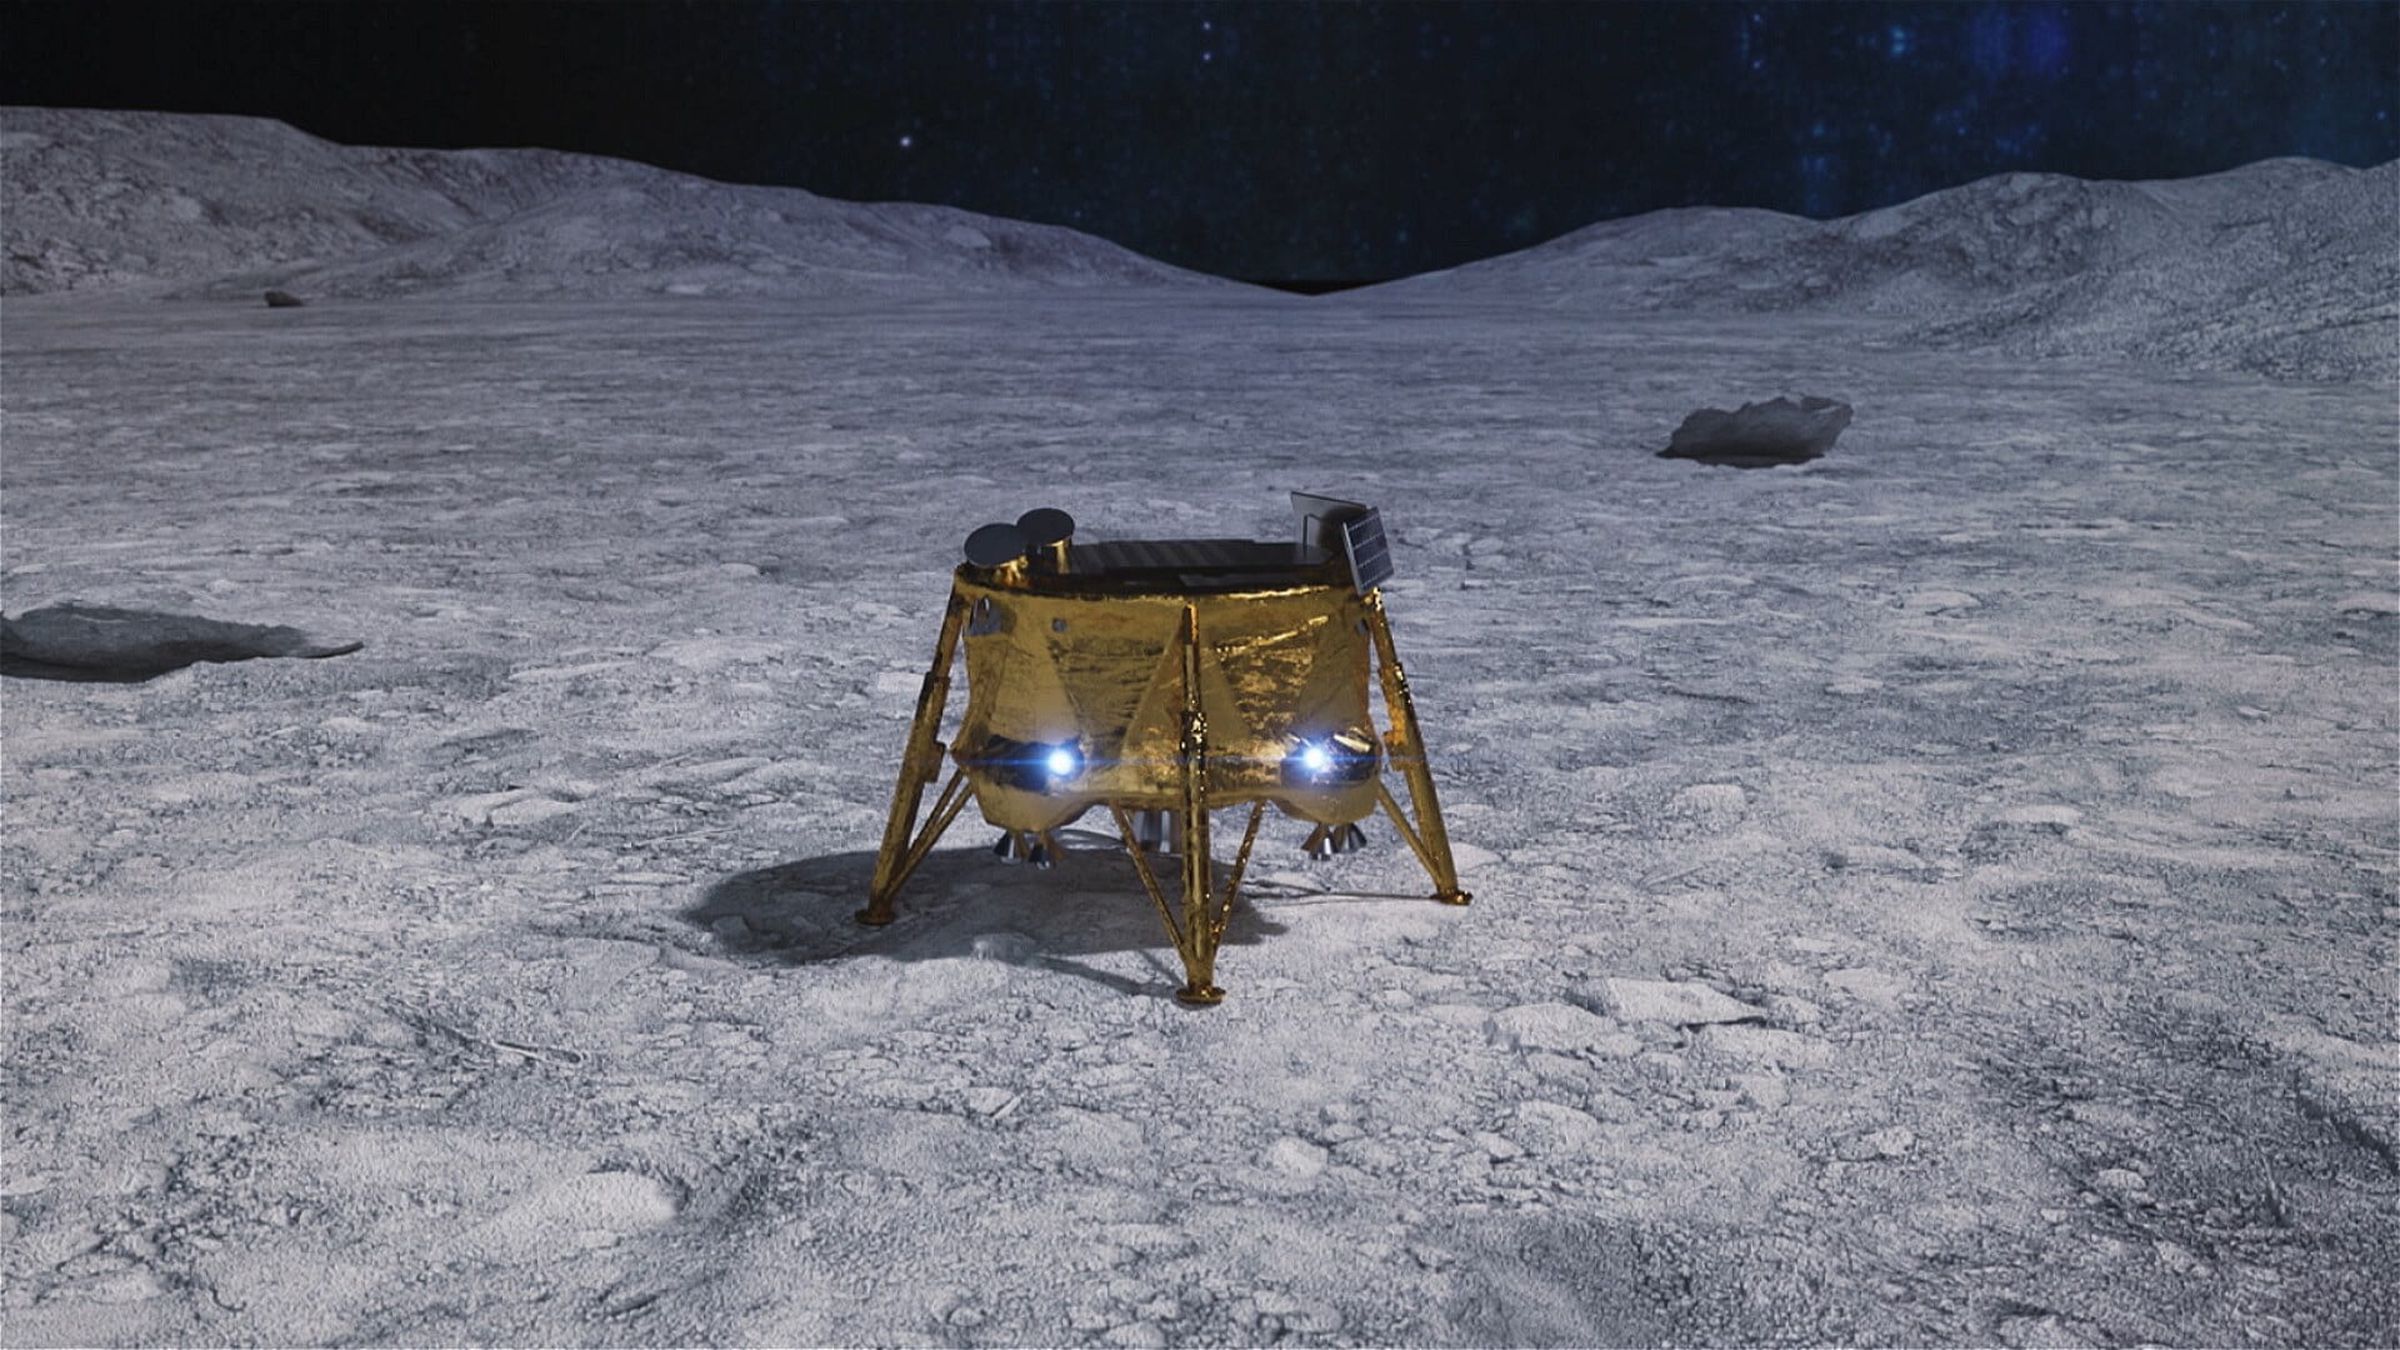 An artistic rendering of SpaceIL’s Beresheet lander if it had landed on the Moon successfully.